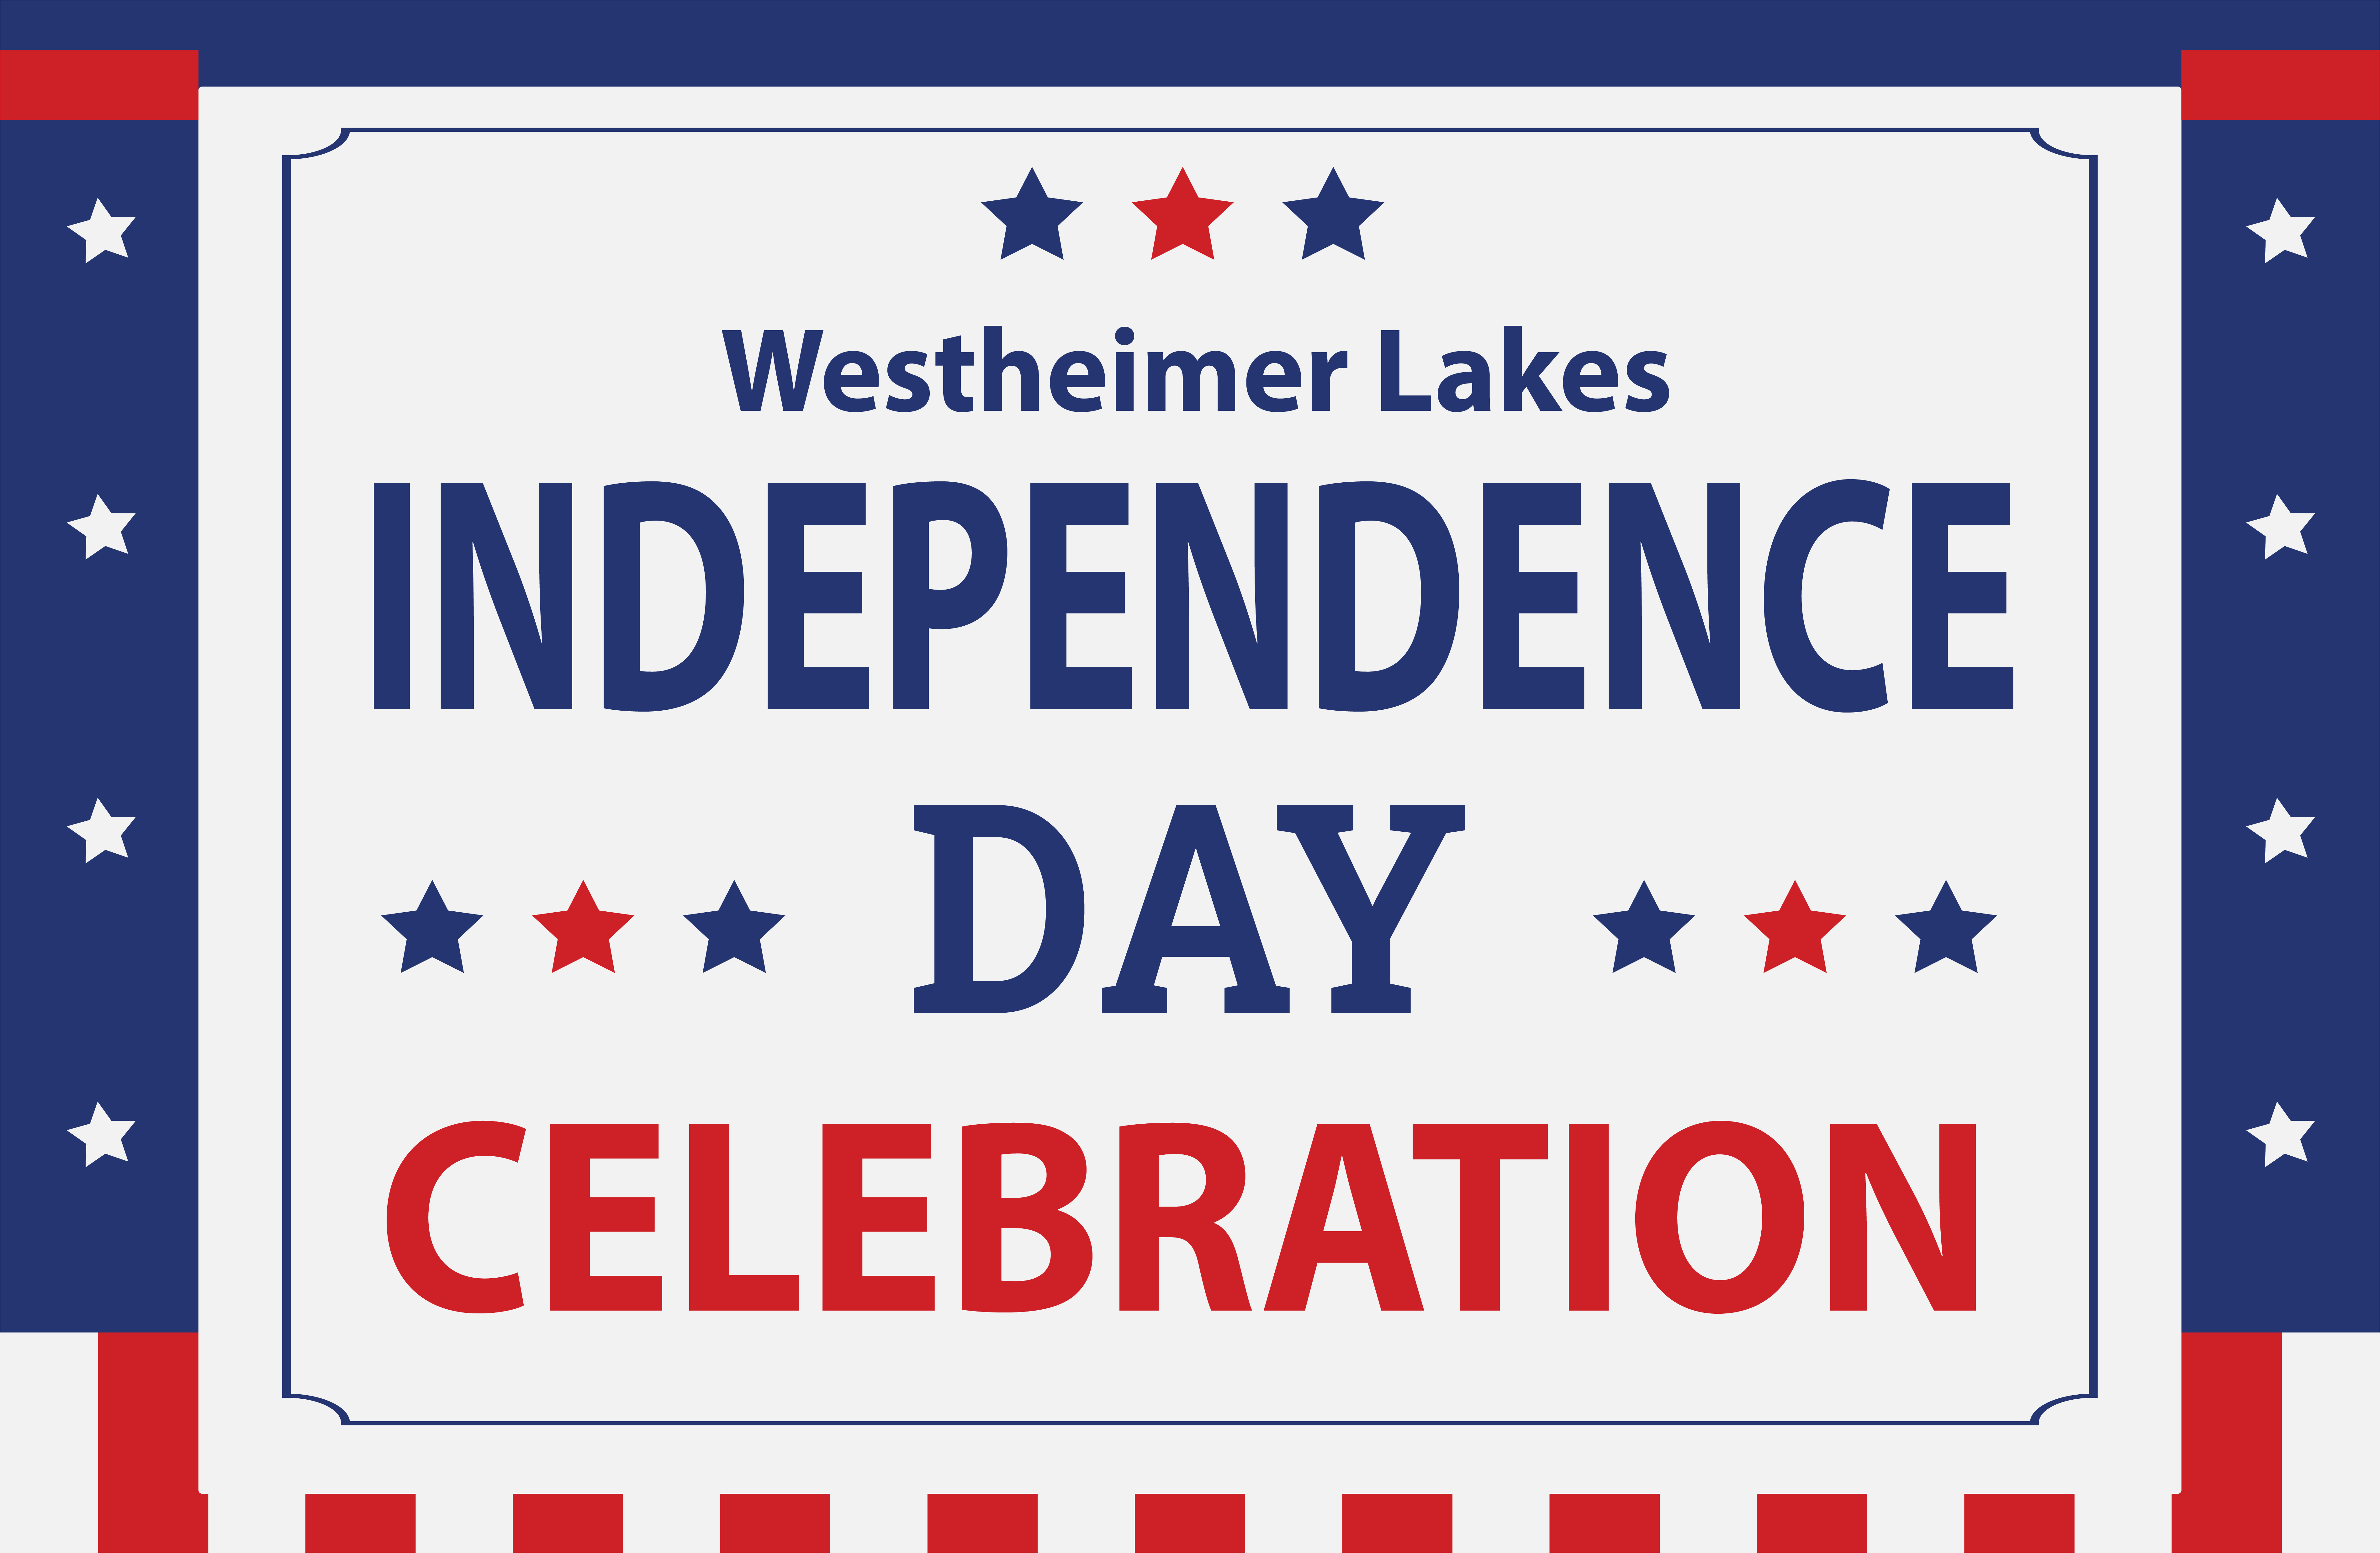 Westheimer Lakes Independence Day Celebration pic